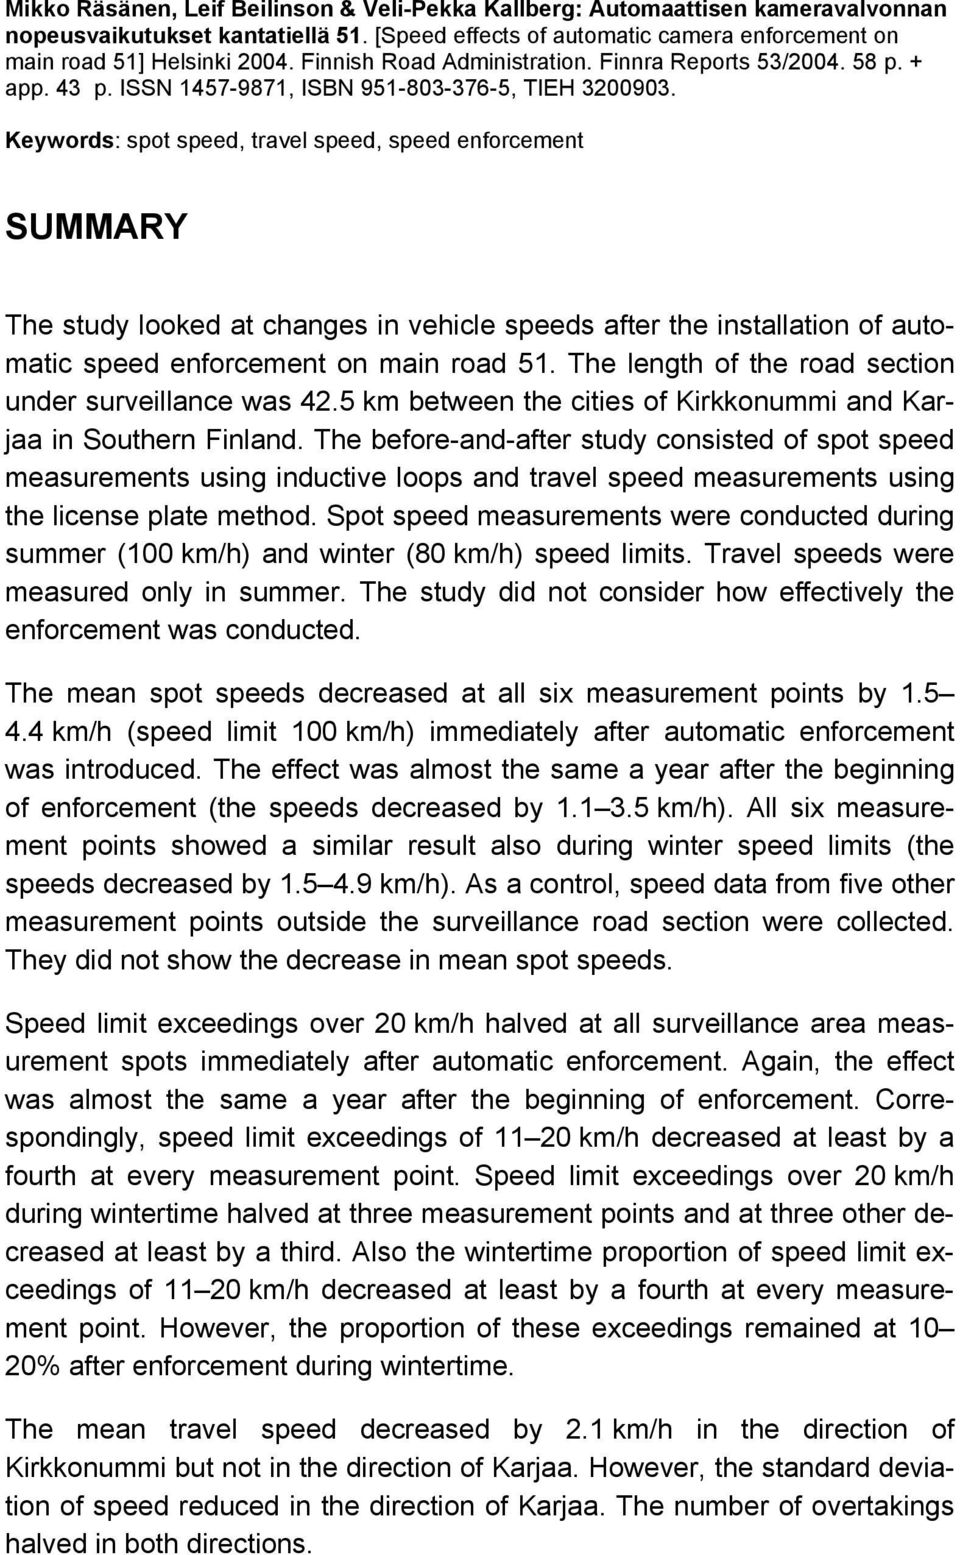 Keywords: spot speed, travel speed, speed enforcement SUMMARY The study looked at changes in vehicle speeds after the installation of automatic speed enforcement on main road 51.